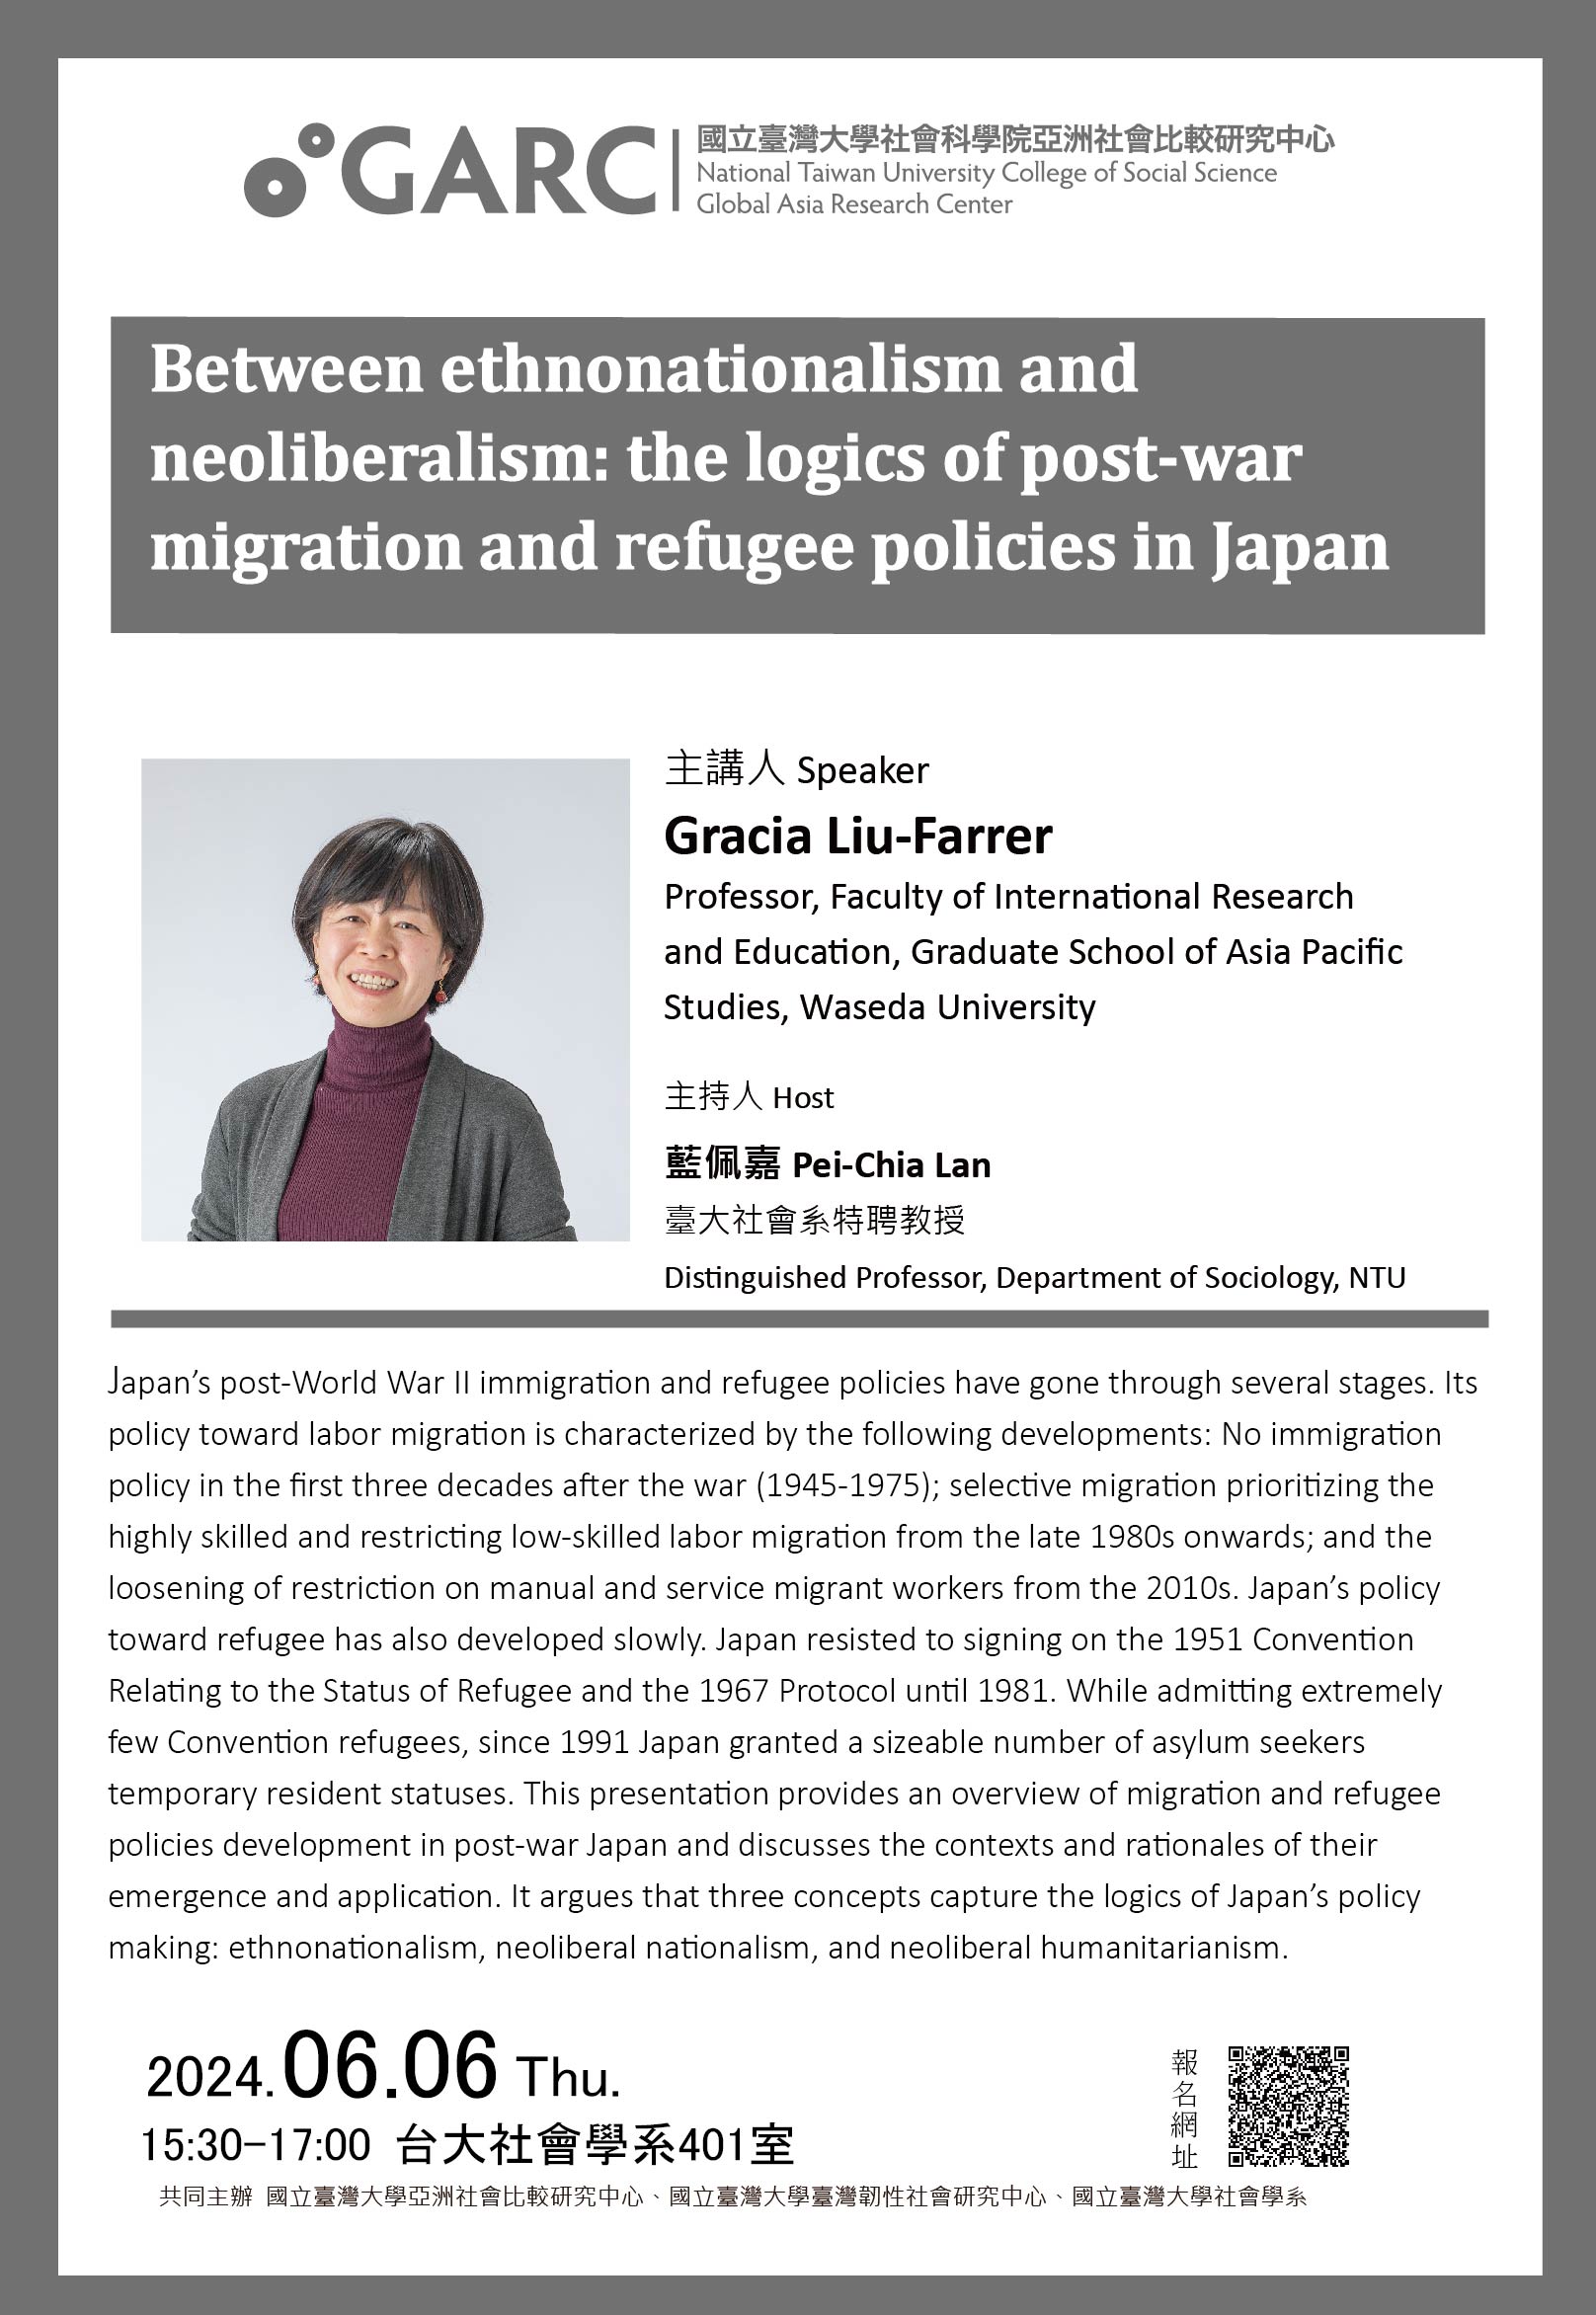 2024.06.06Between ethnonationalism and neoliberalism: the logics of post-war migration and refugee policies in Japan